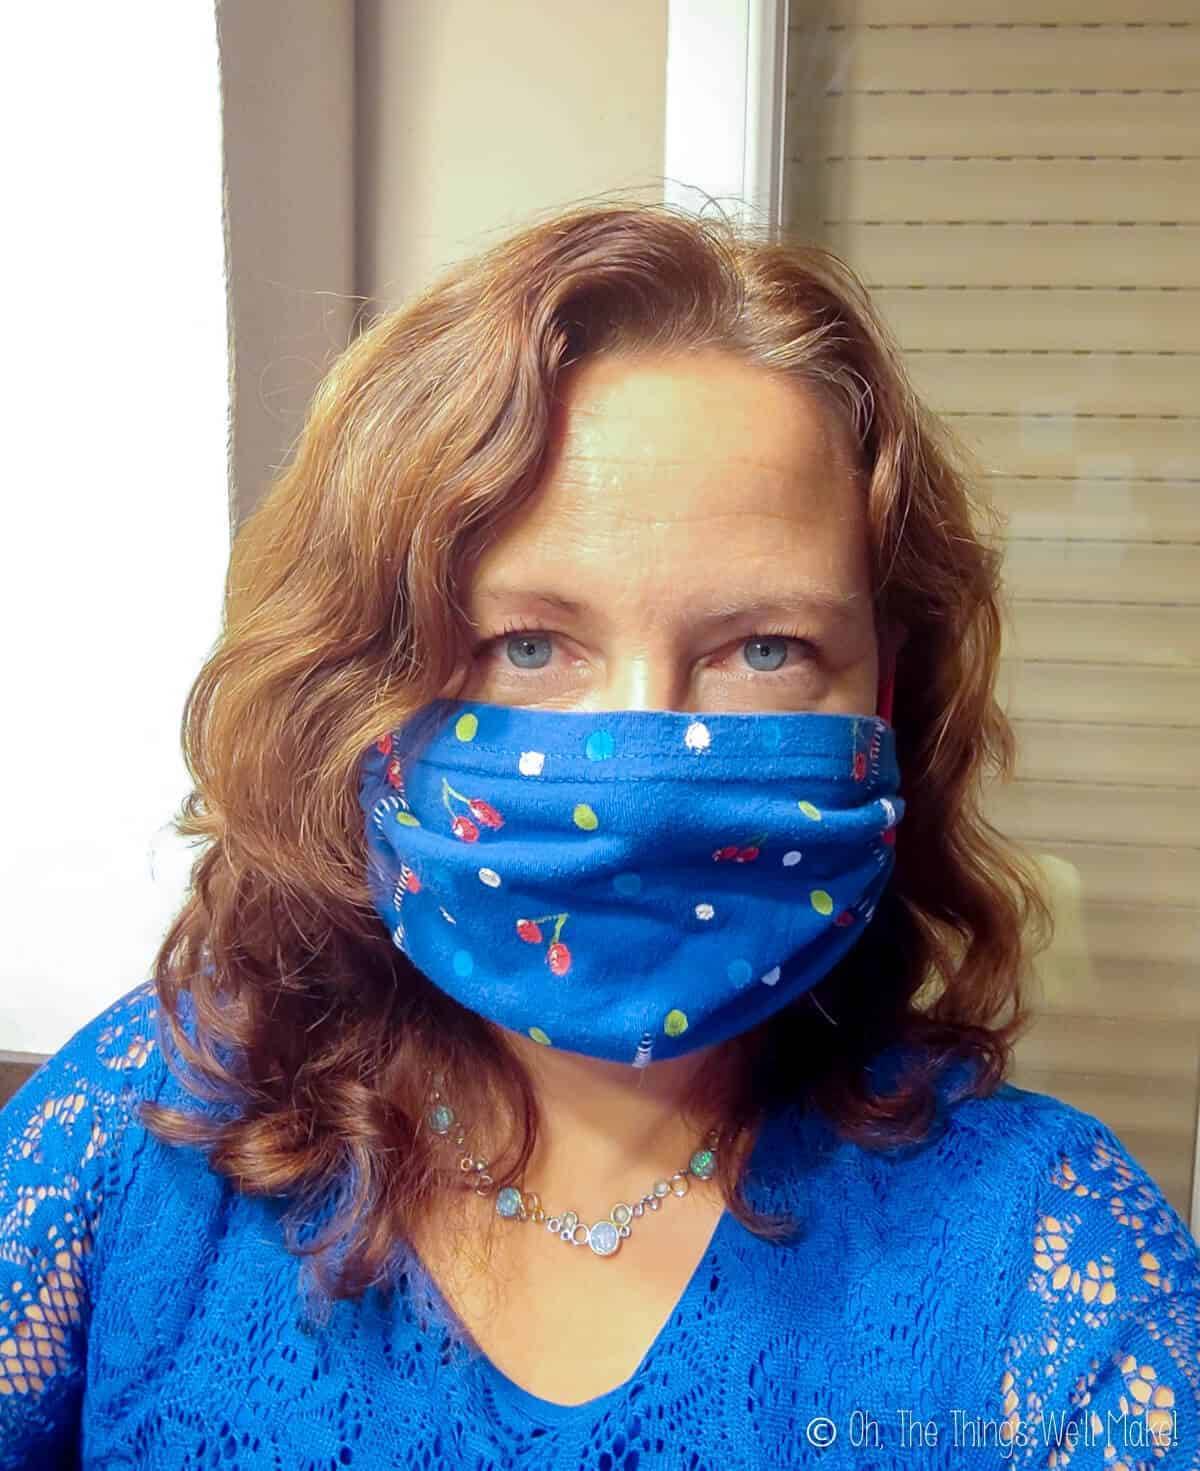 A woman wearing a blue jersey face mask which has been painted with cherries and polka dots